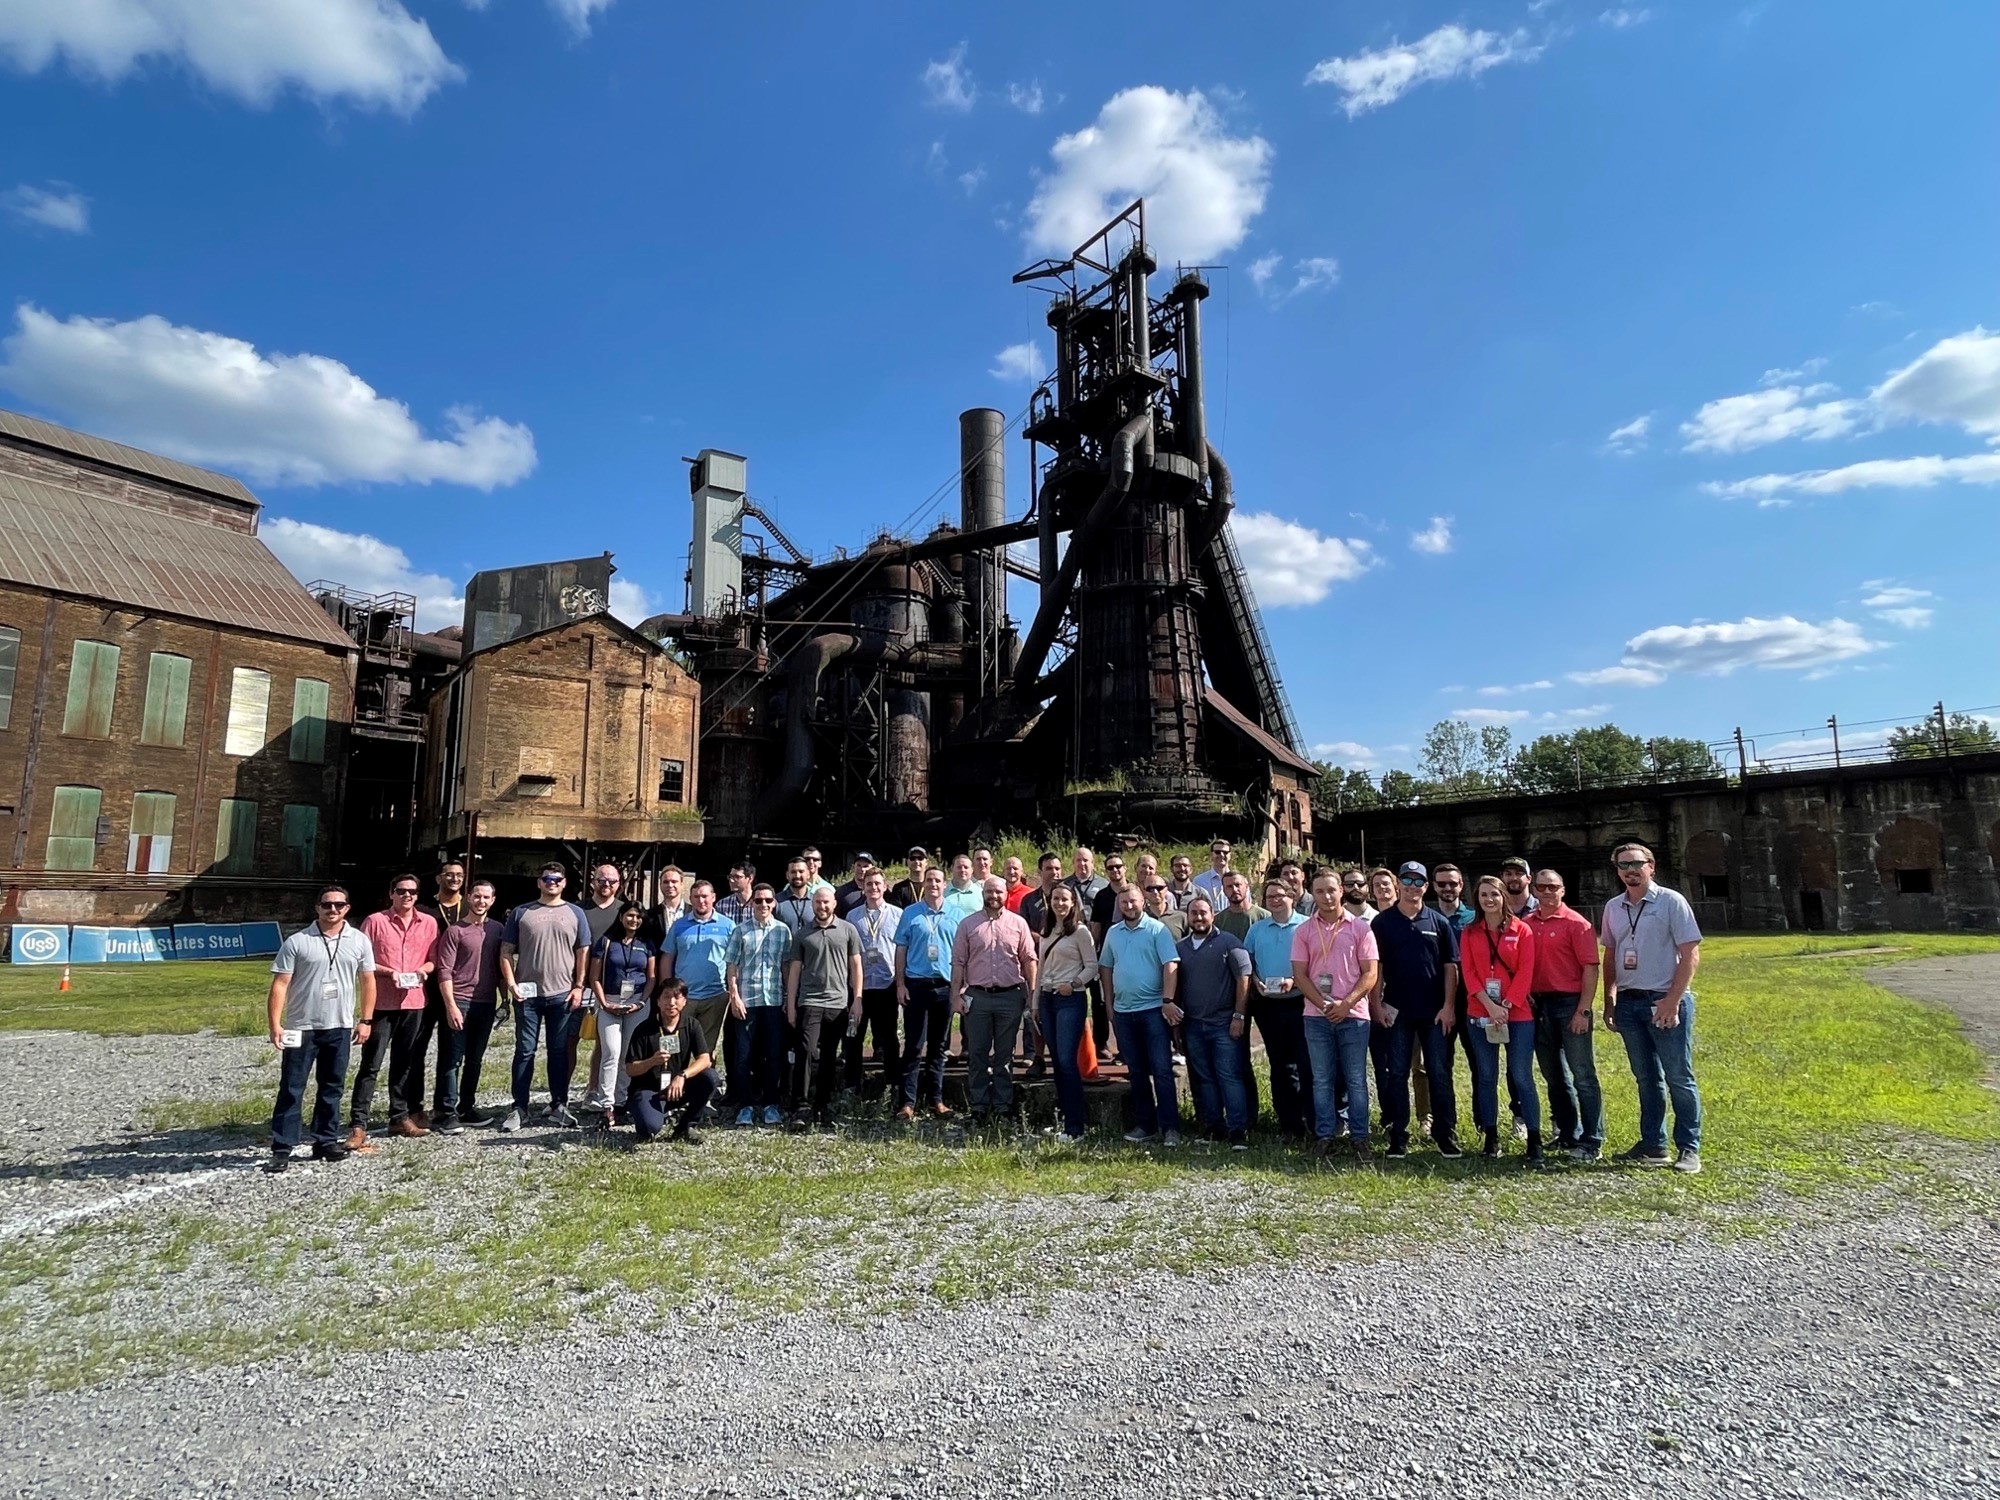 ISRI’s BYAB Attendees Come Together for Two Days of Teambuilding and Networking